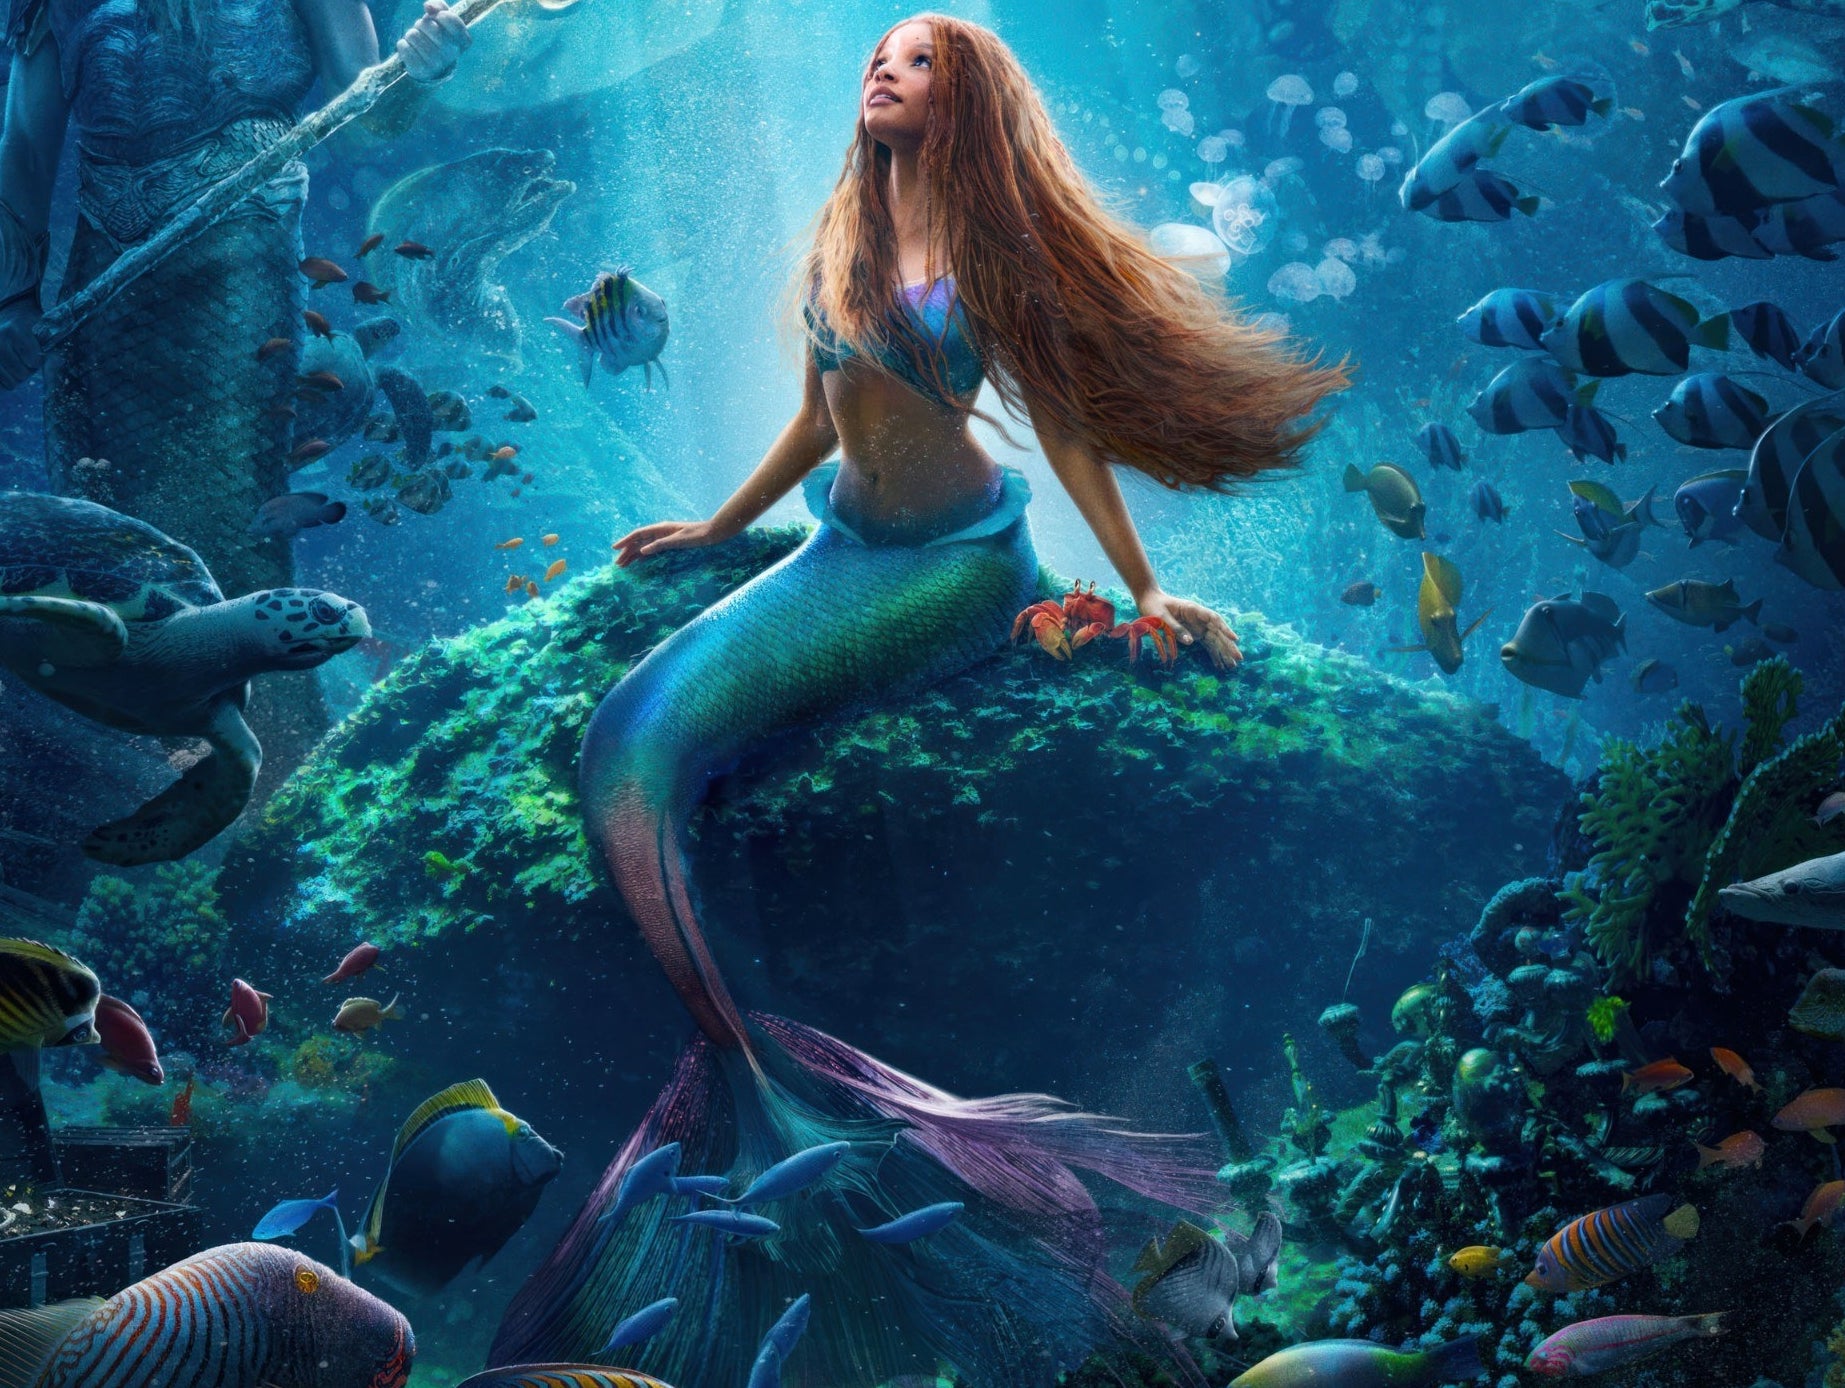 Little Mermaid: Why is Halle Bailey starrer facing a backlash with